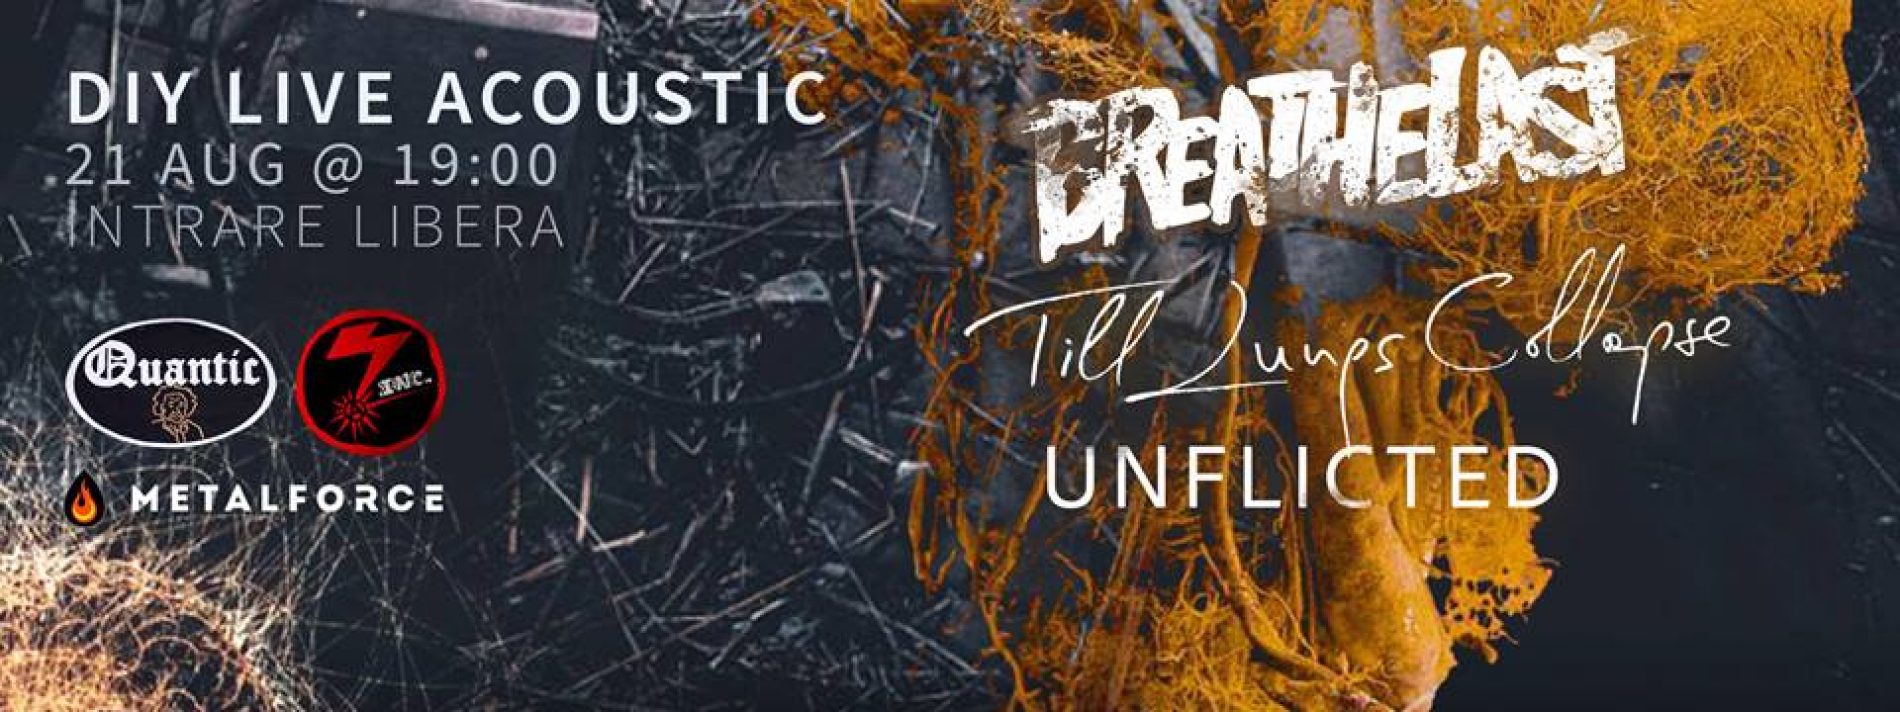 DIY Acoustic Live in Quantic: Concert Breathelast, Till Lungs Collapse, Unflicted